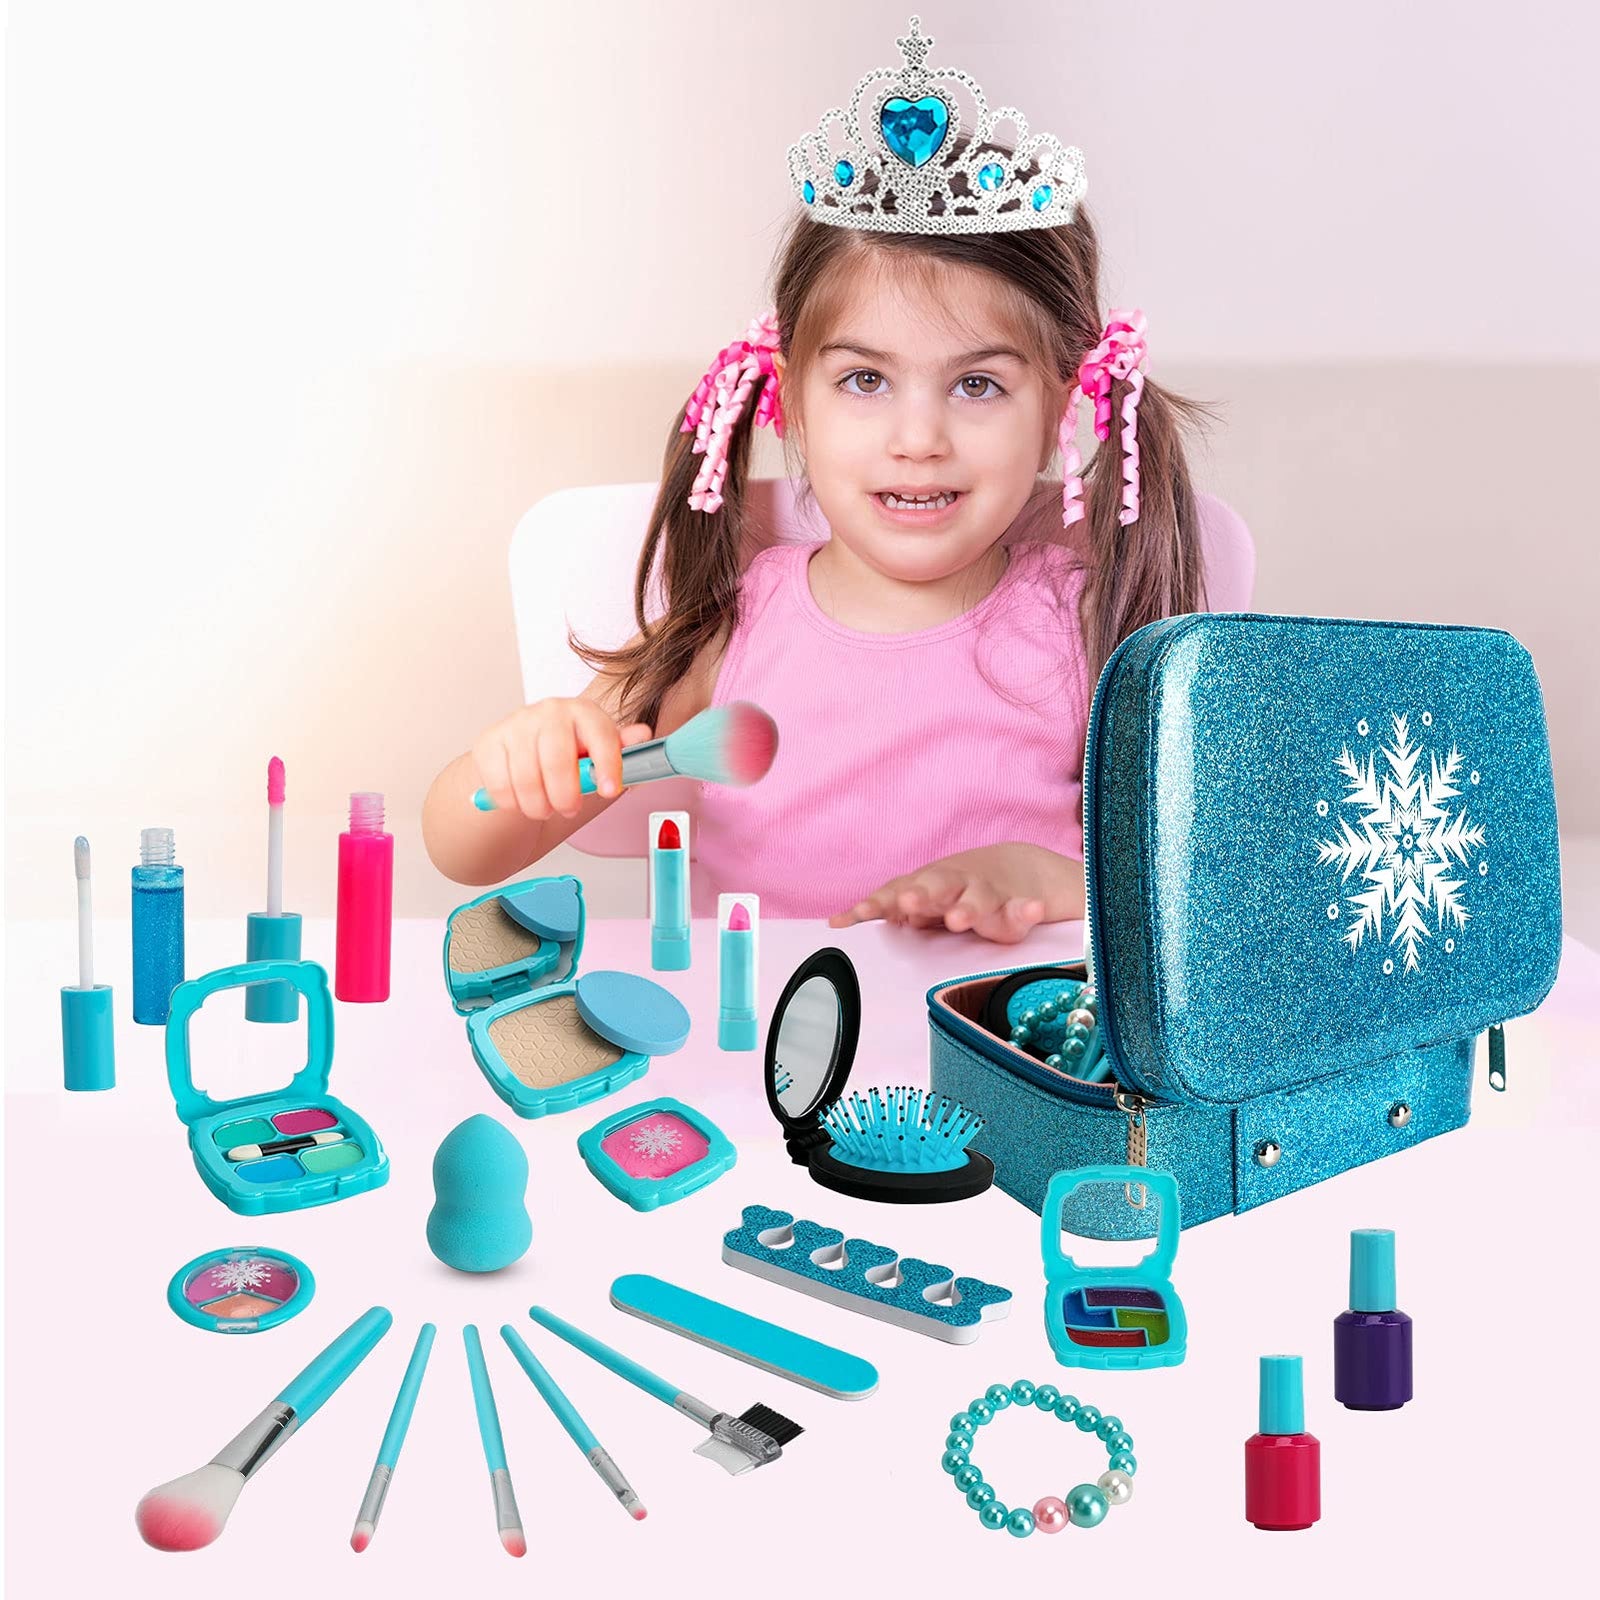 Flybay Kids Makeup Kit for Girl, Real Makeup Set, Washable Makeup Kit for Kids,, Girl Gift Toys Toddler Play Makeup Set for 4 5 6 7 8 Years Old Little Girls